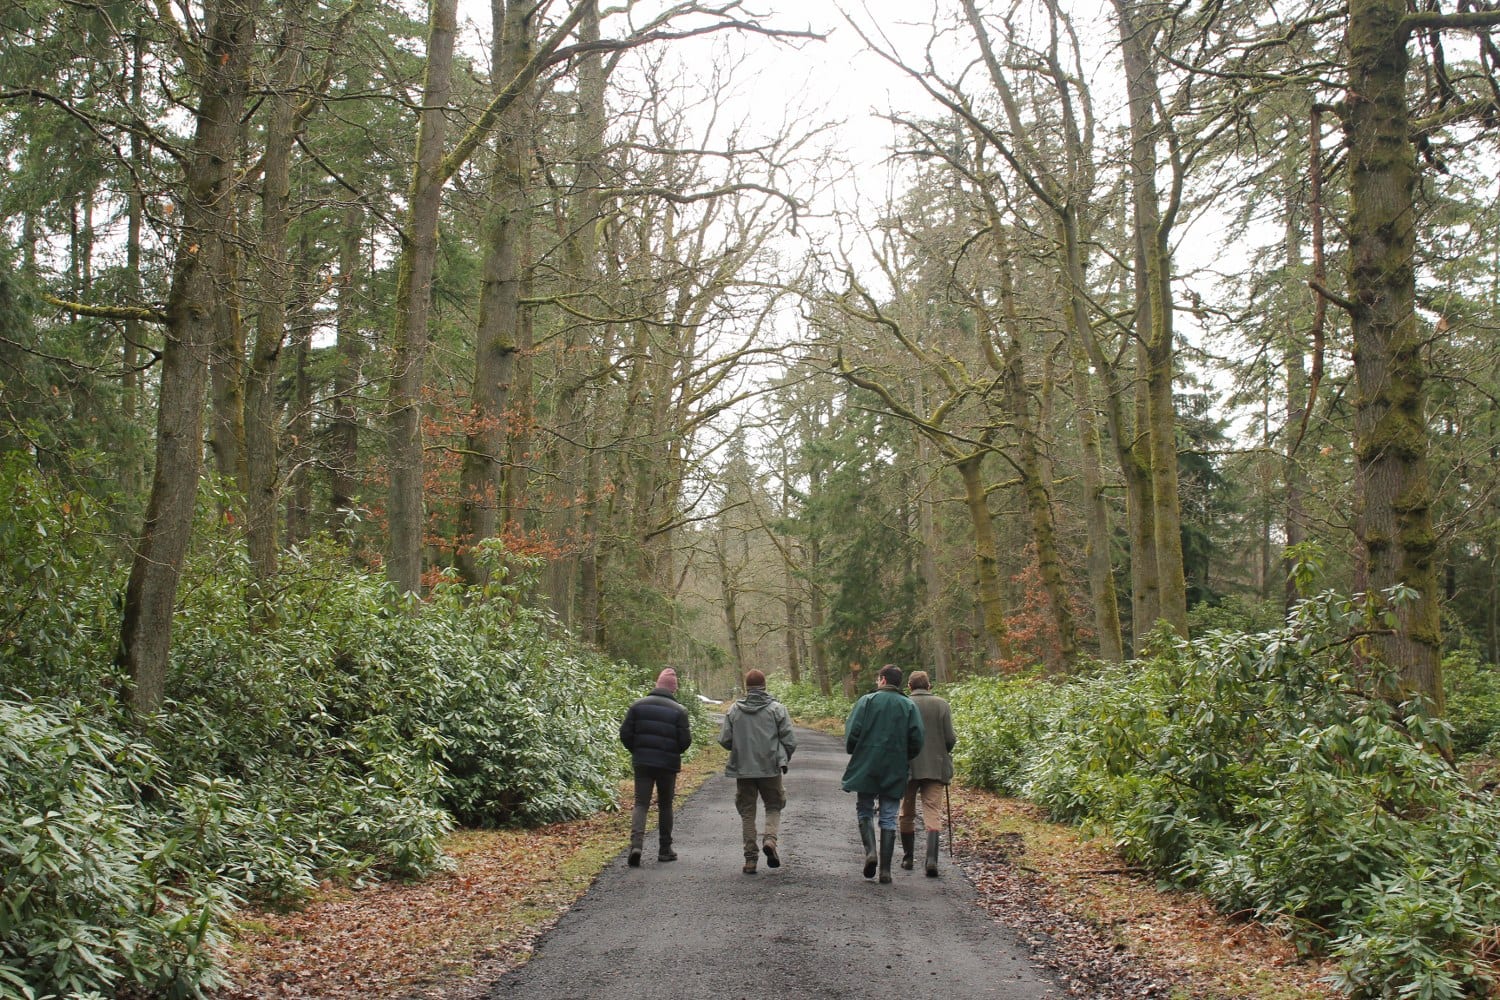 WOODLAND TRUST TO BRING THE CHARTER FOR TREES, WOODS AND PEOPLE TO LIGHTS